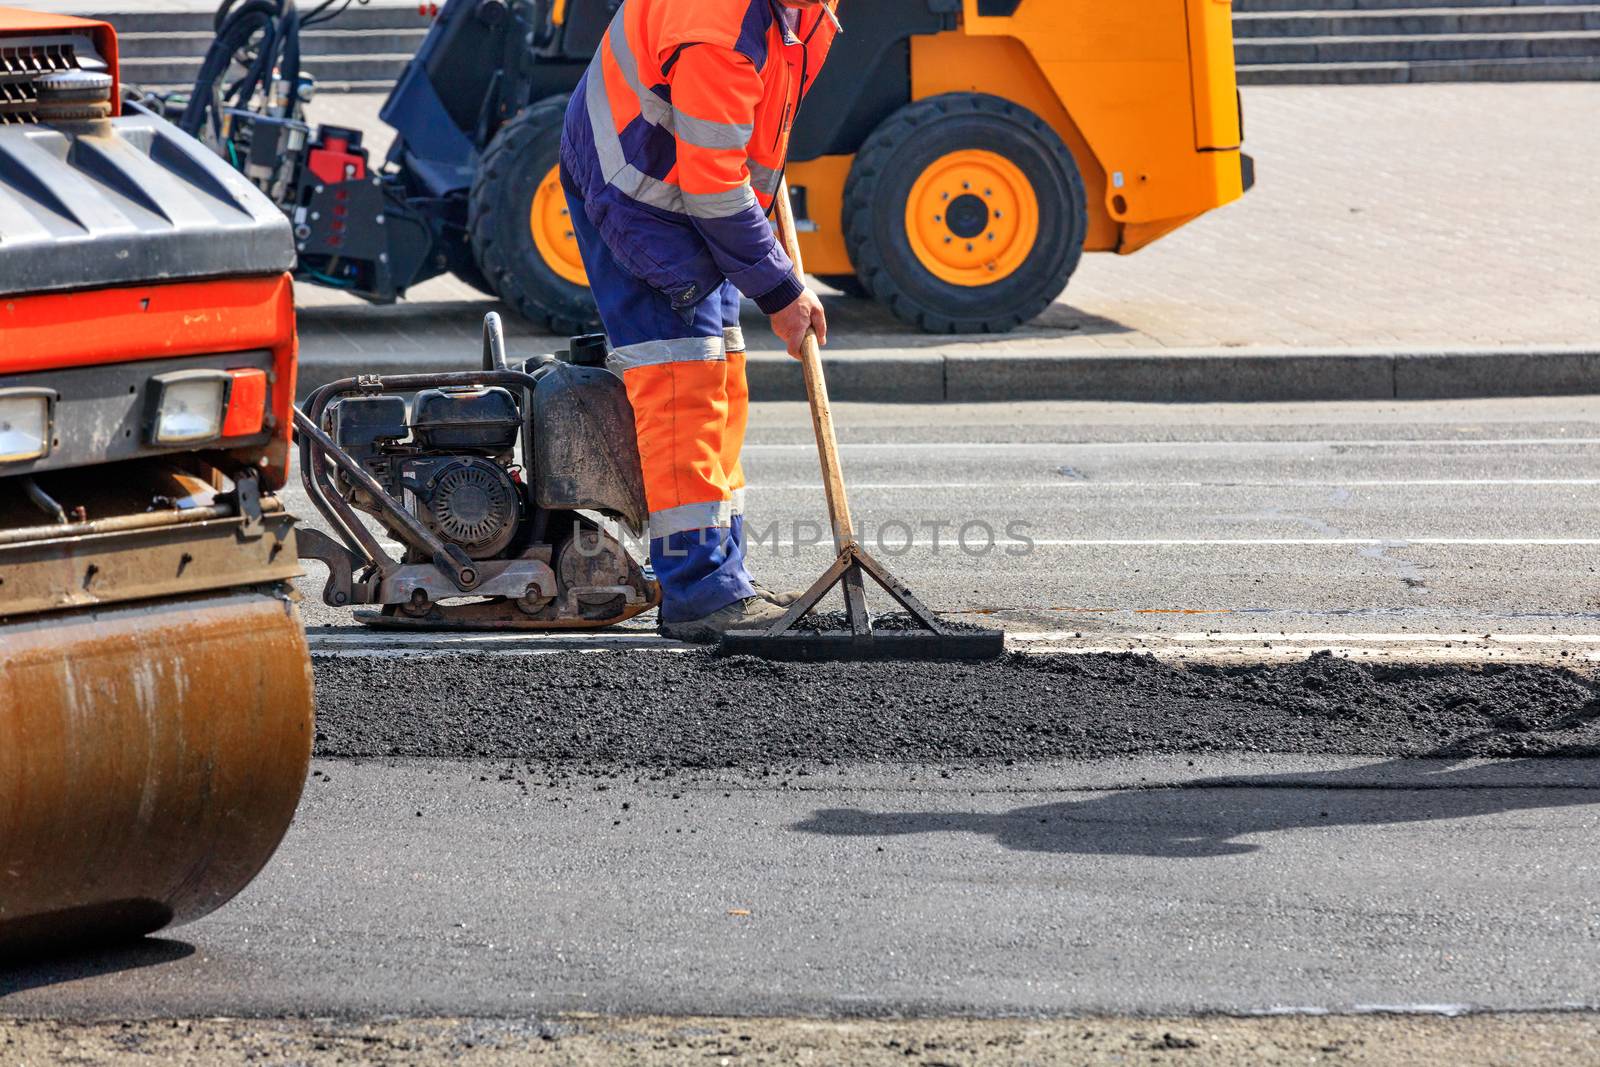 A road worker repairs a section of the road with a skating rink, rammer, bulldozer and wooden level.